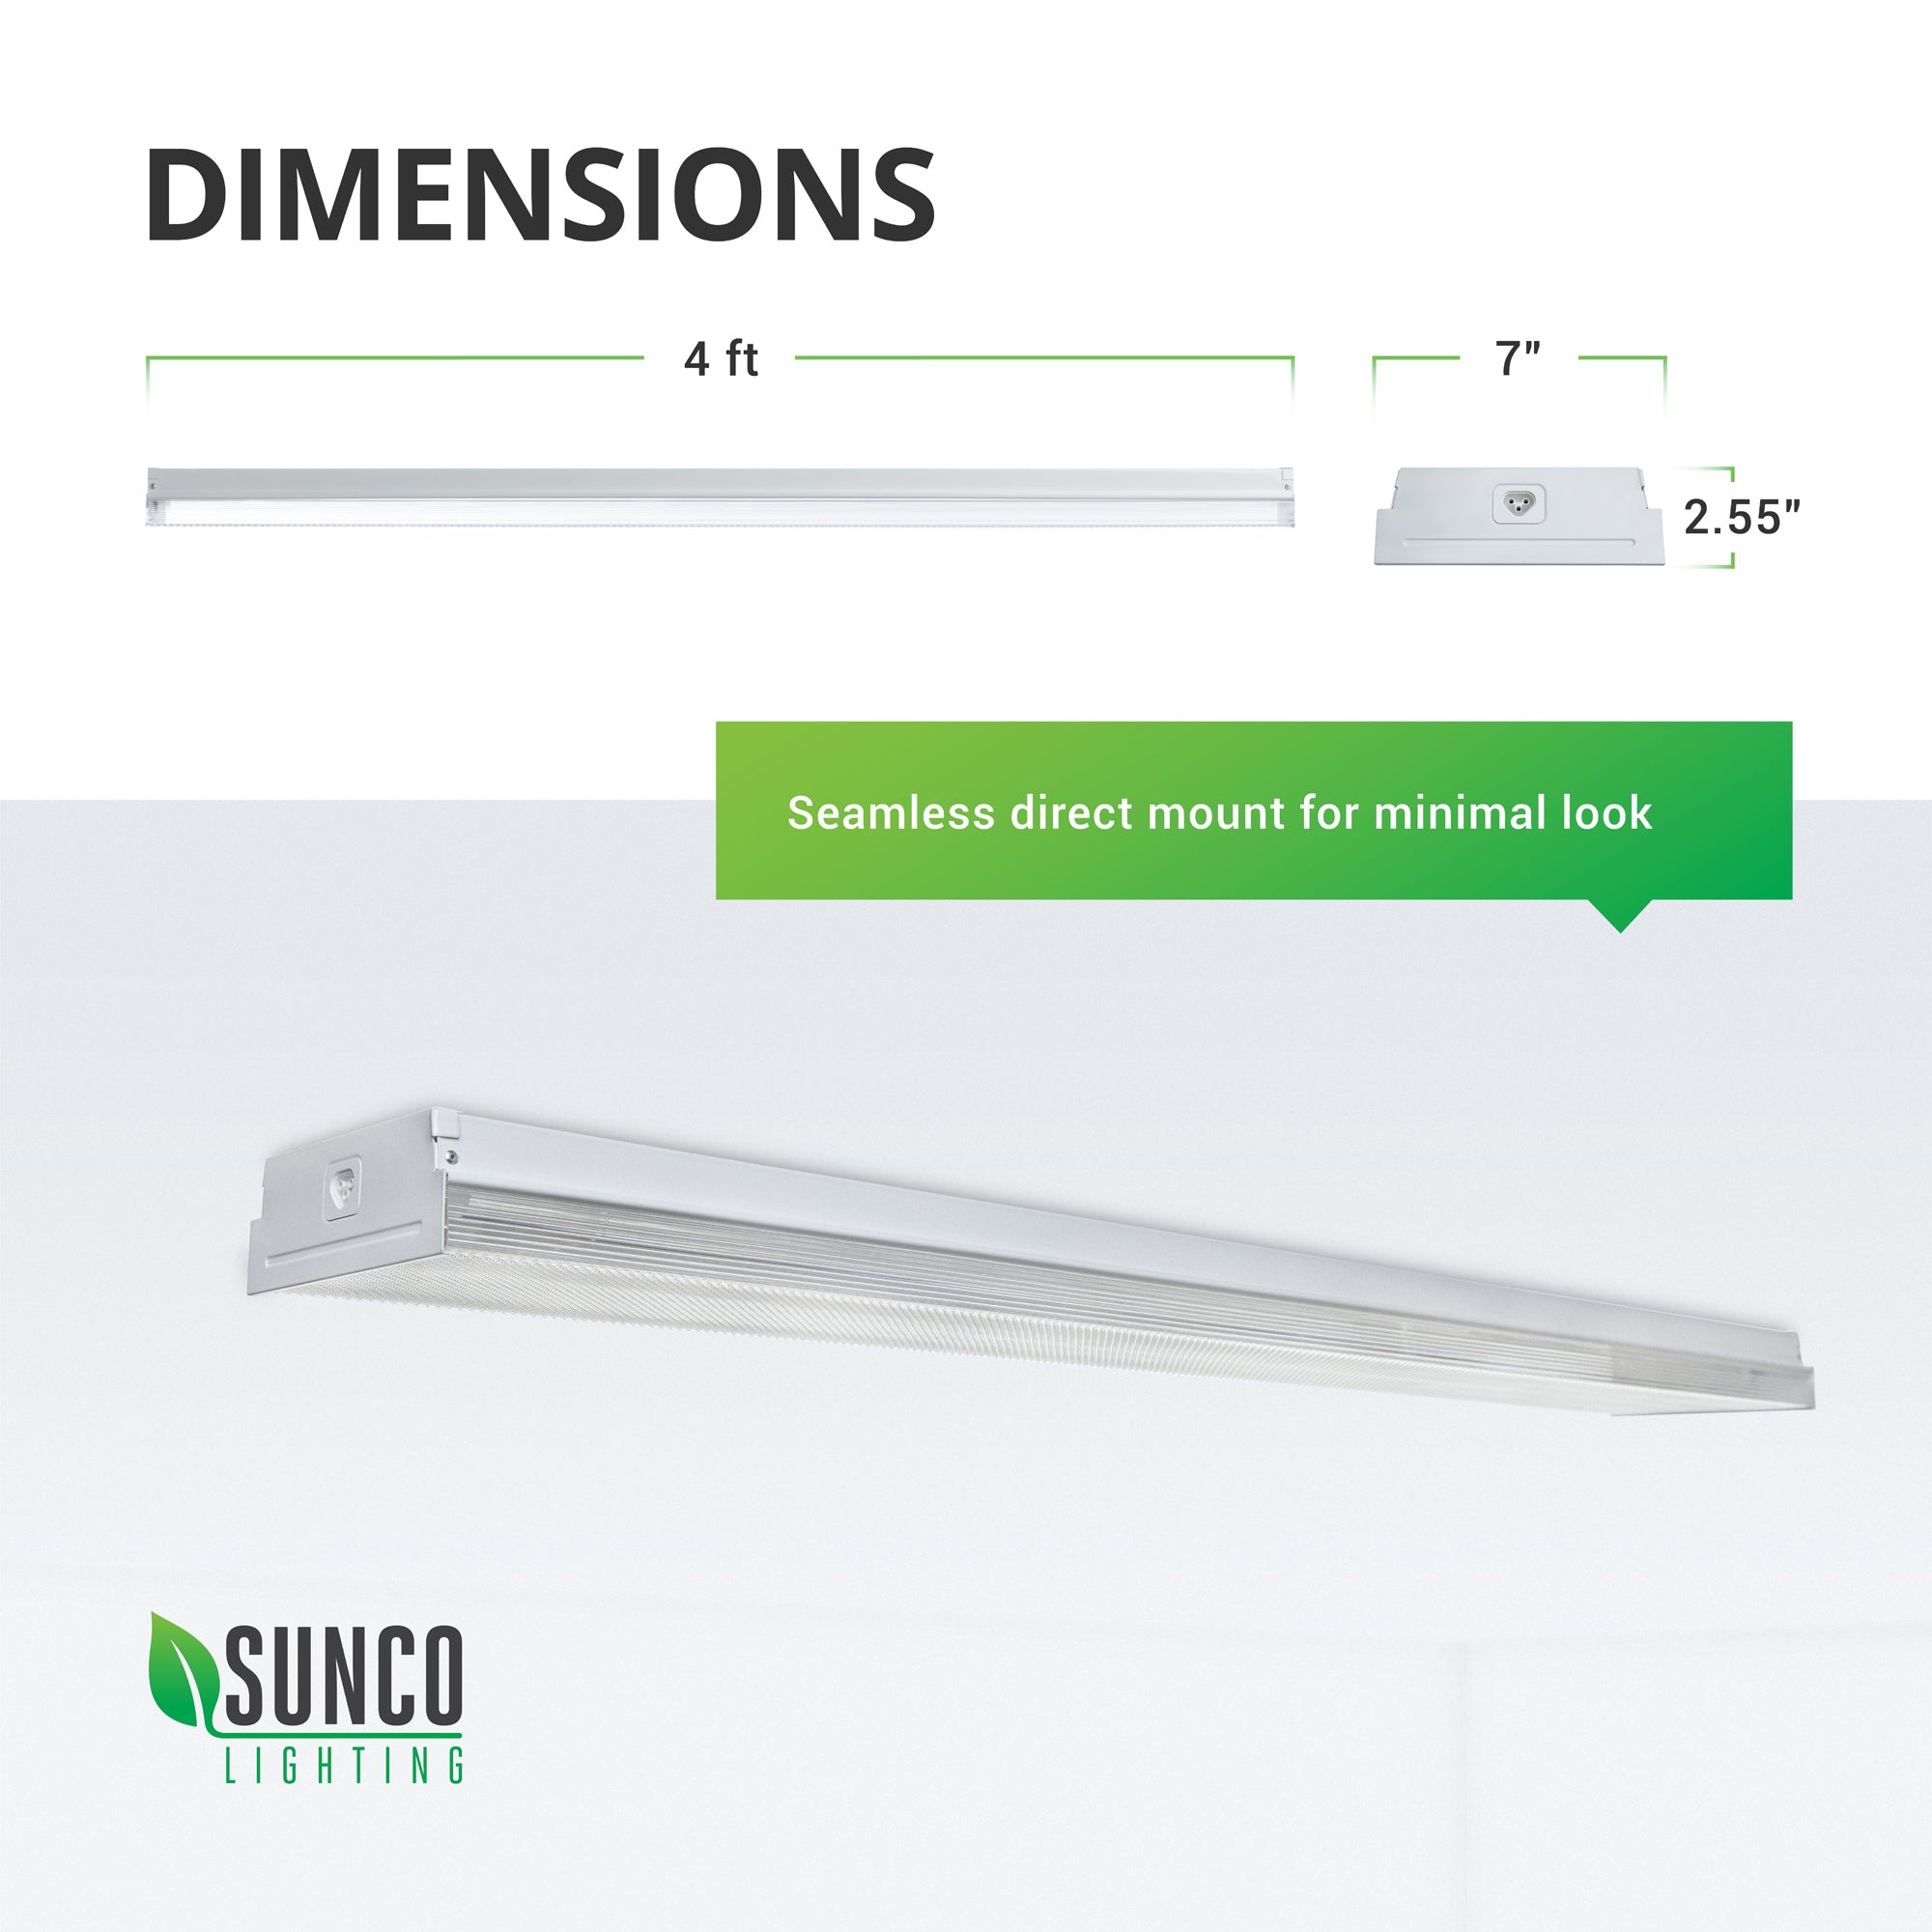 Dimensions of this 50W Sunco Prisma Wraparound LED Shop Light: Width: 7-inches, Length: 4ft, Height: 2.55 inches. You can provide a seamless, minimalist look with this direct mount fixture. Image shows the LED Wraparound flush to the ceiling. The linking port is clearly seen on the end of the fixture. This instant on light is suitable for all indoor applications as it is damp rated.